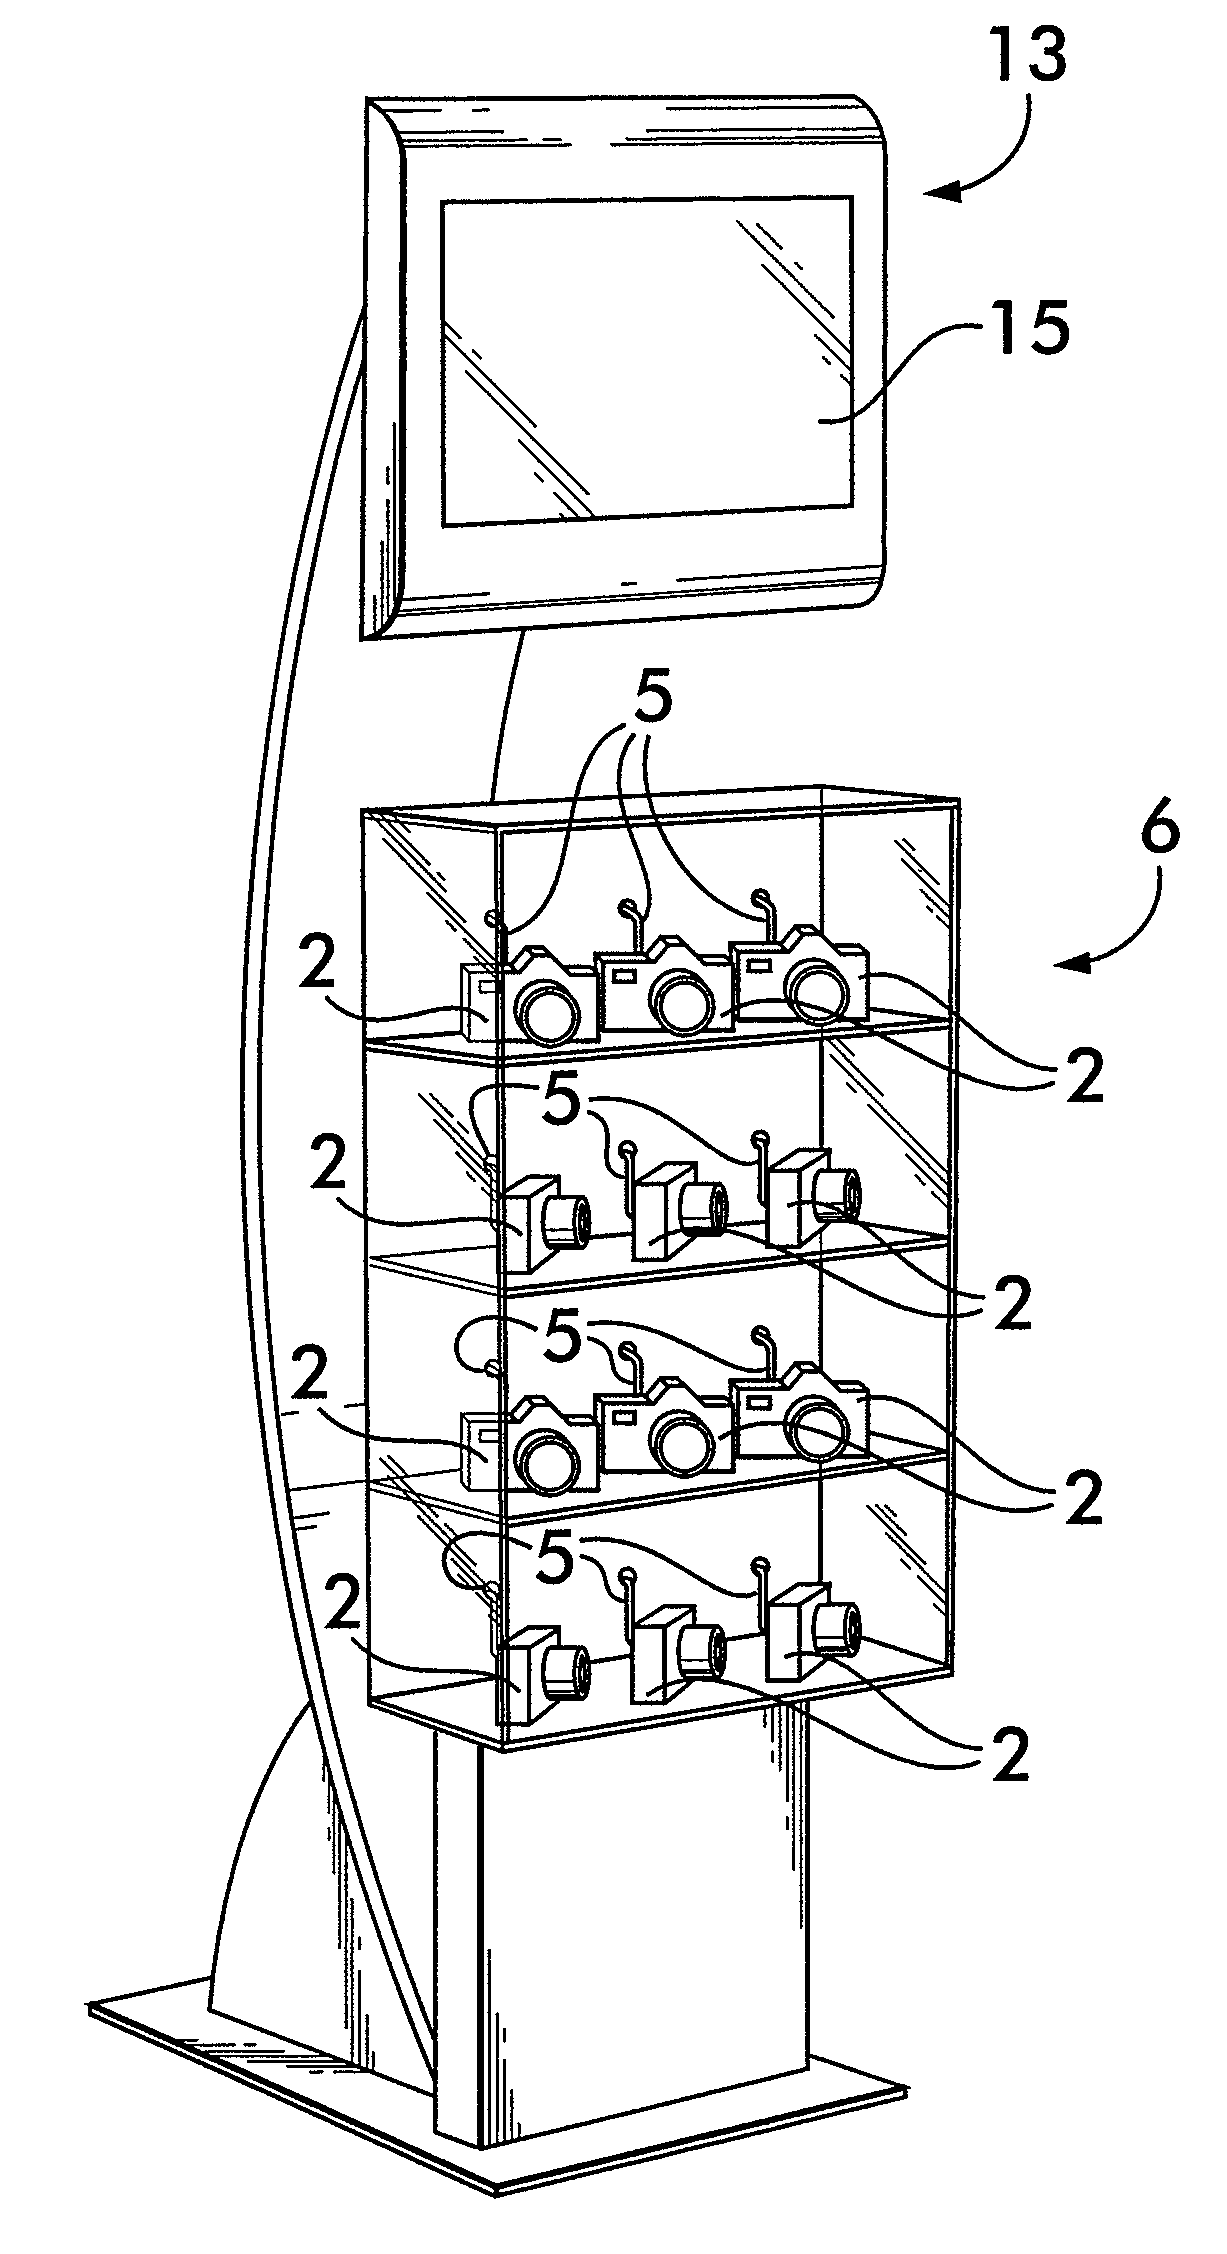 System and method for securing and displaying items for merchandising